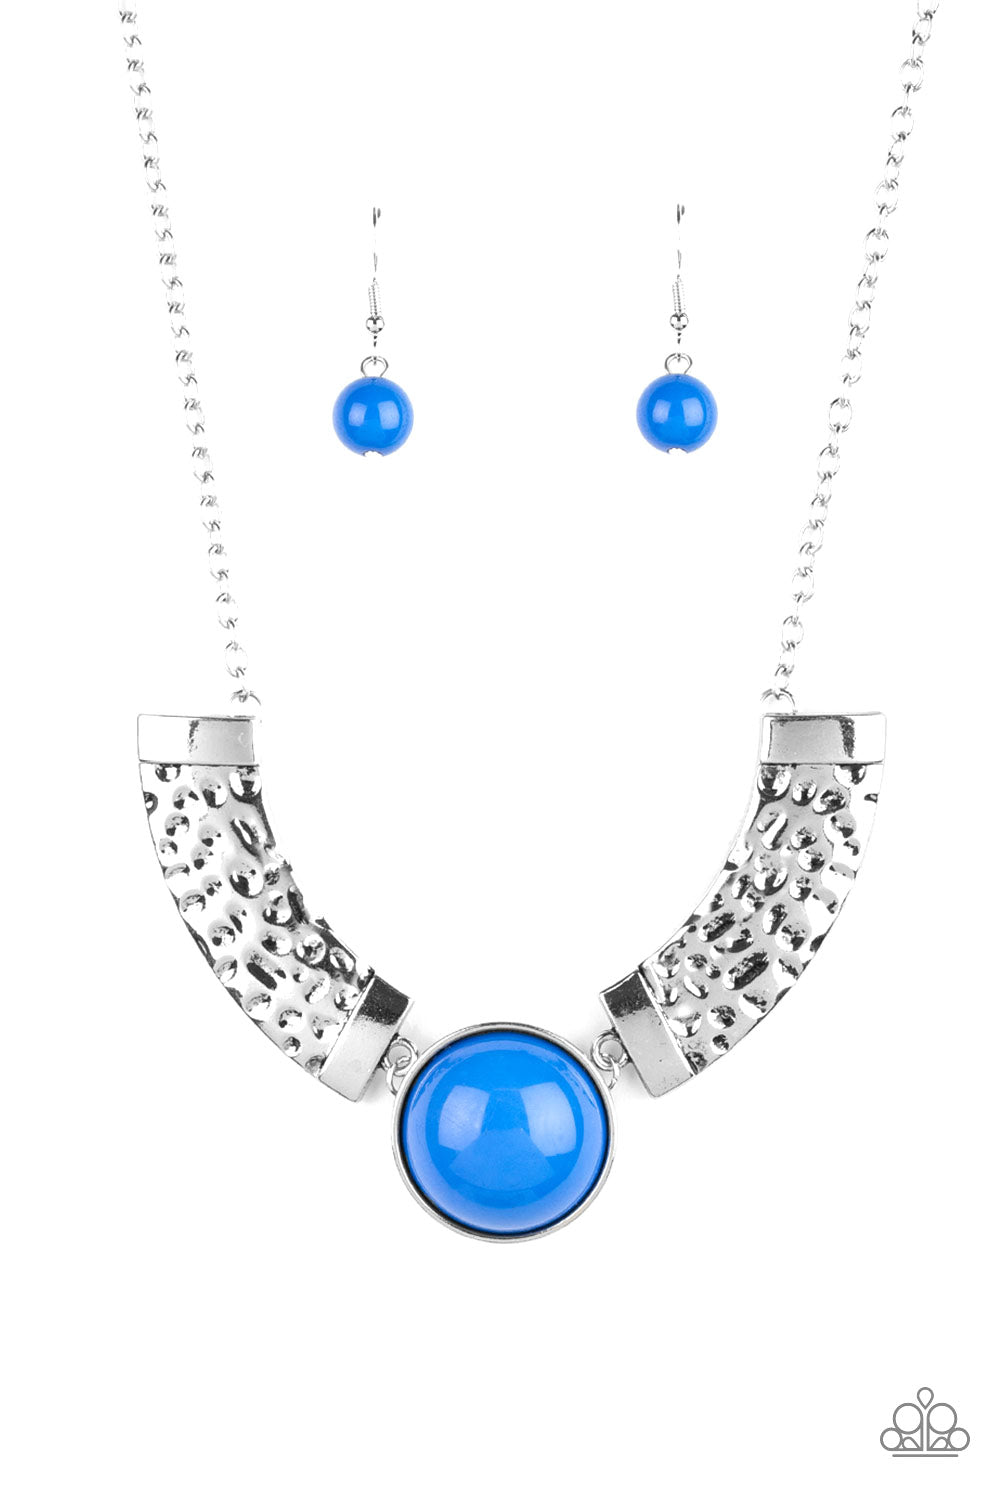 Egyptian Spell - blue - Paparazzi necklace